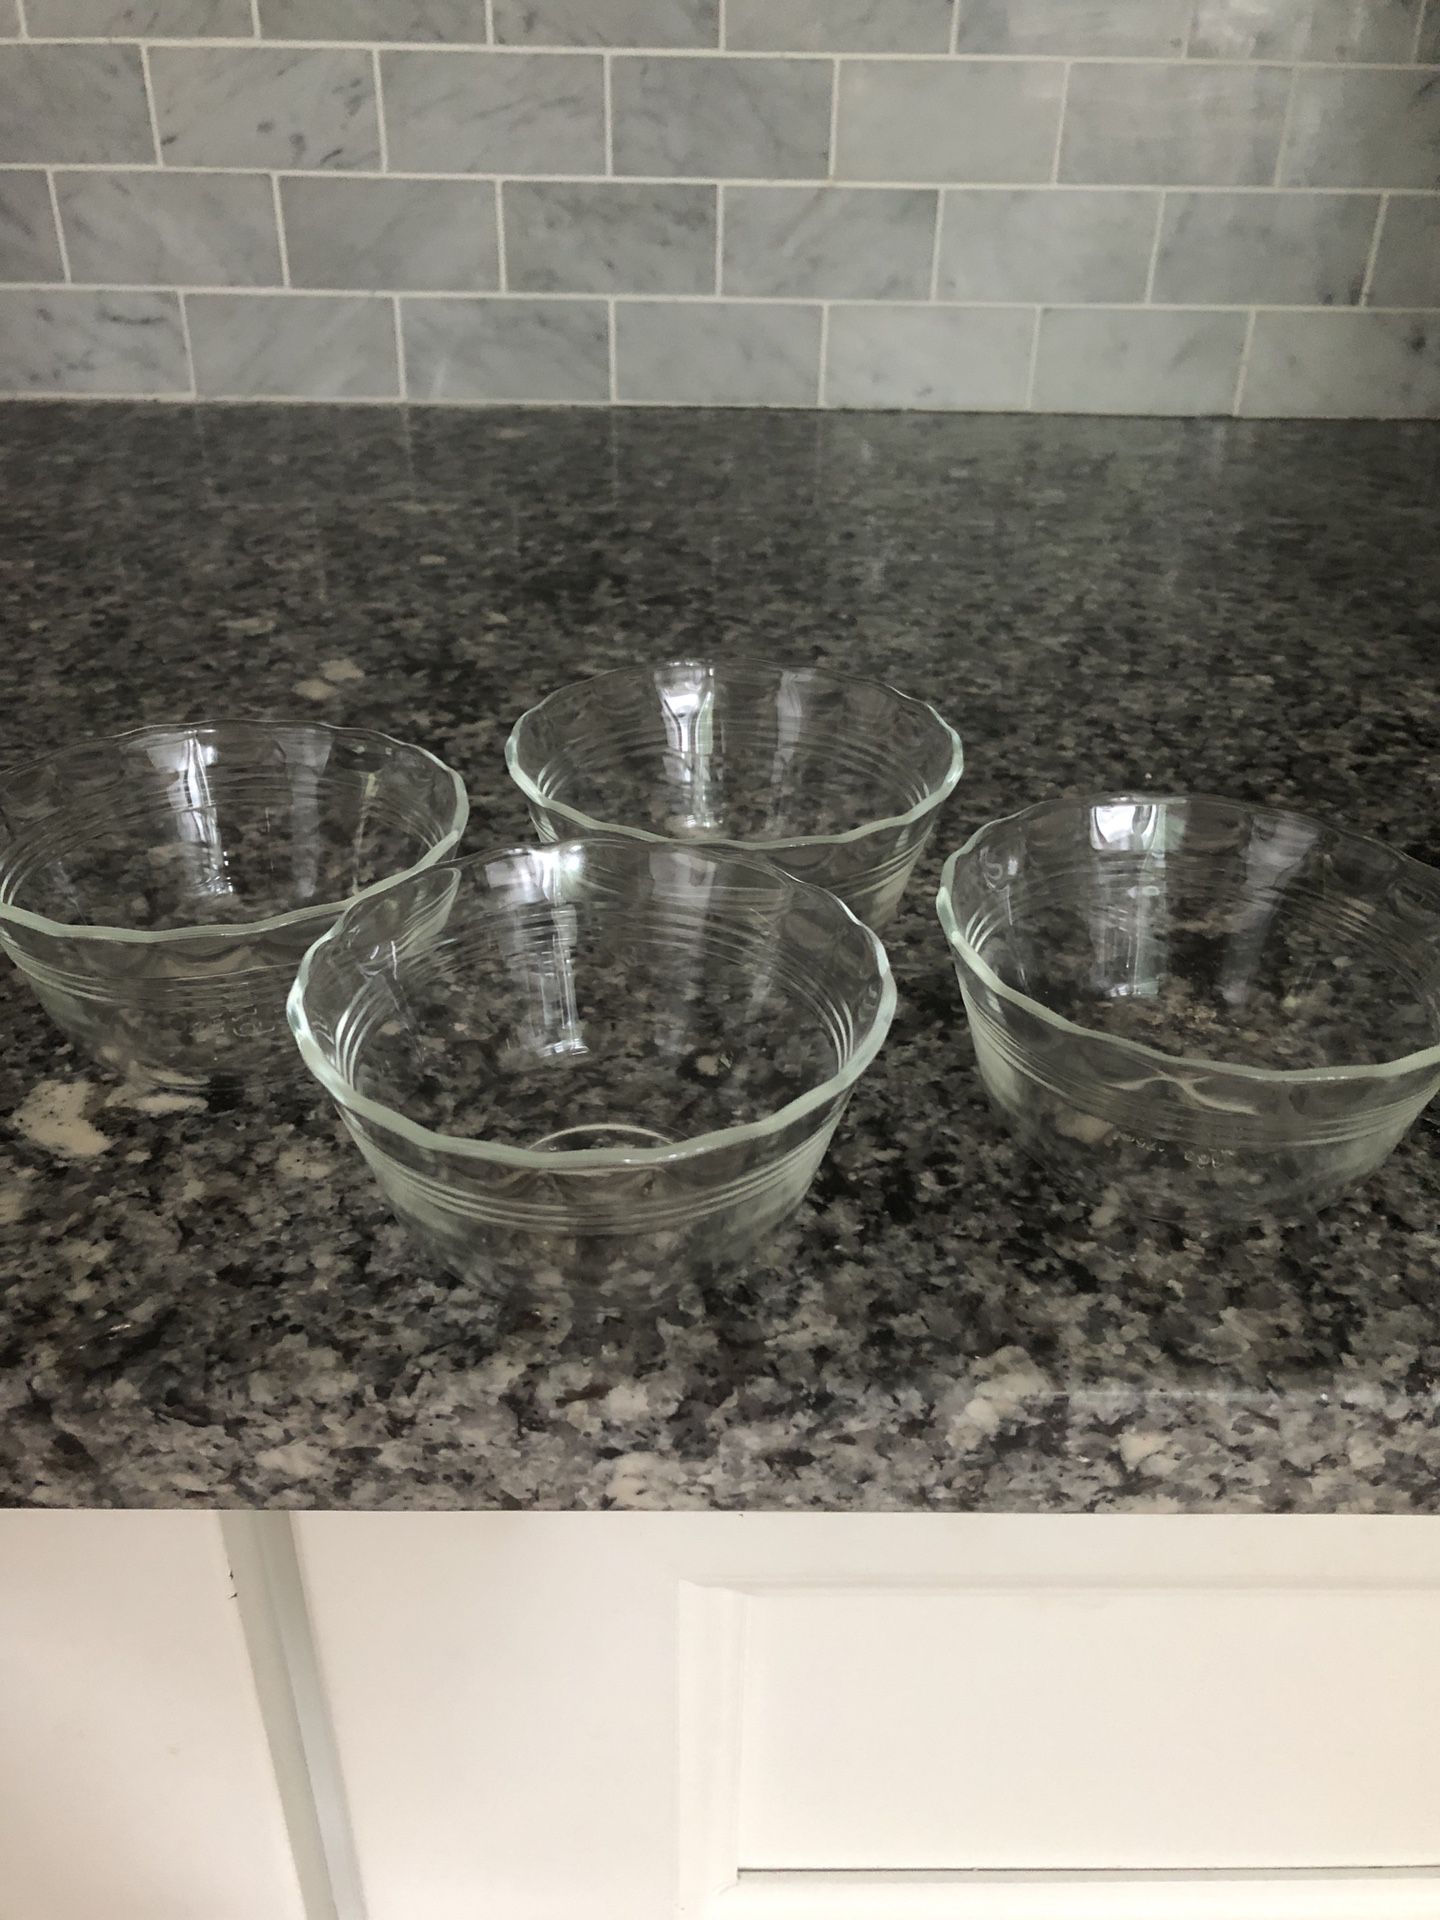 4 perfect Pyrex pudding custard dishes